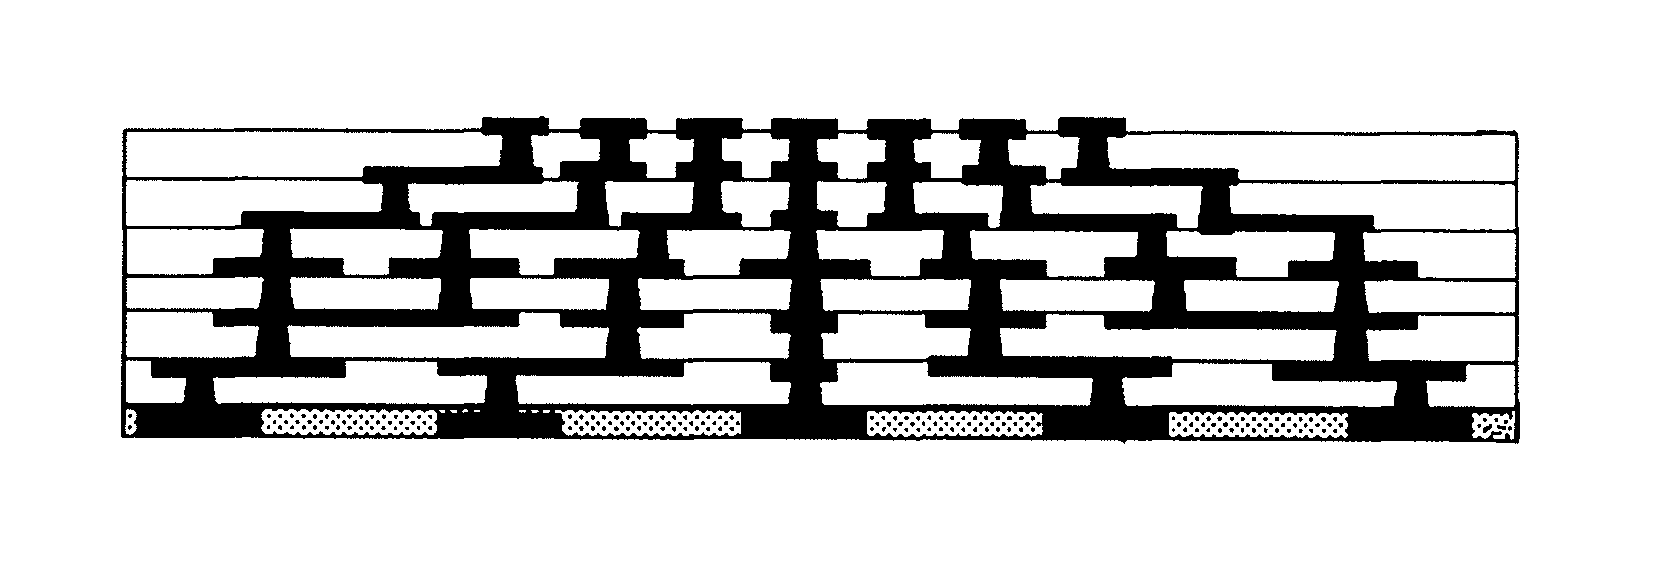 Multilayered circuit board and semiconductor device